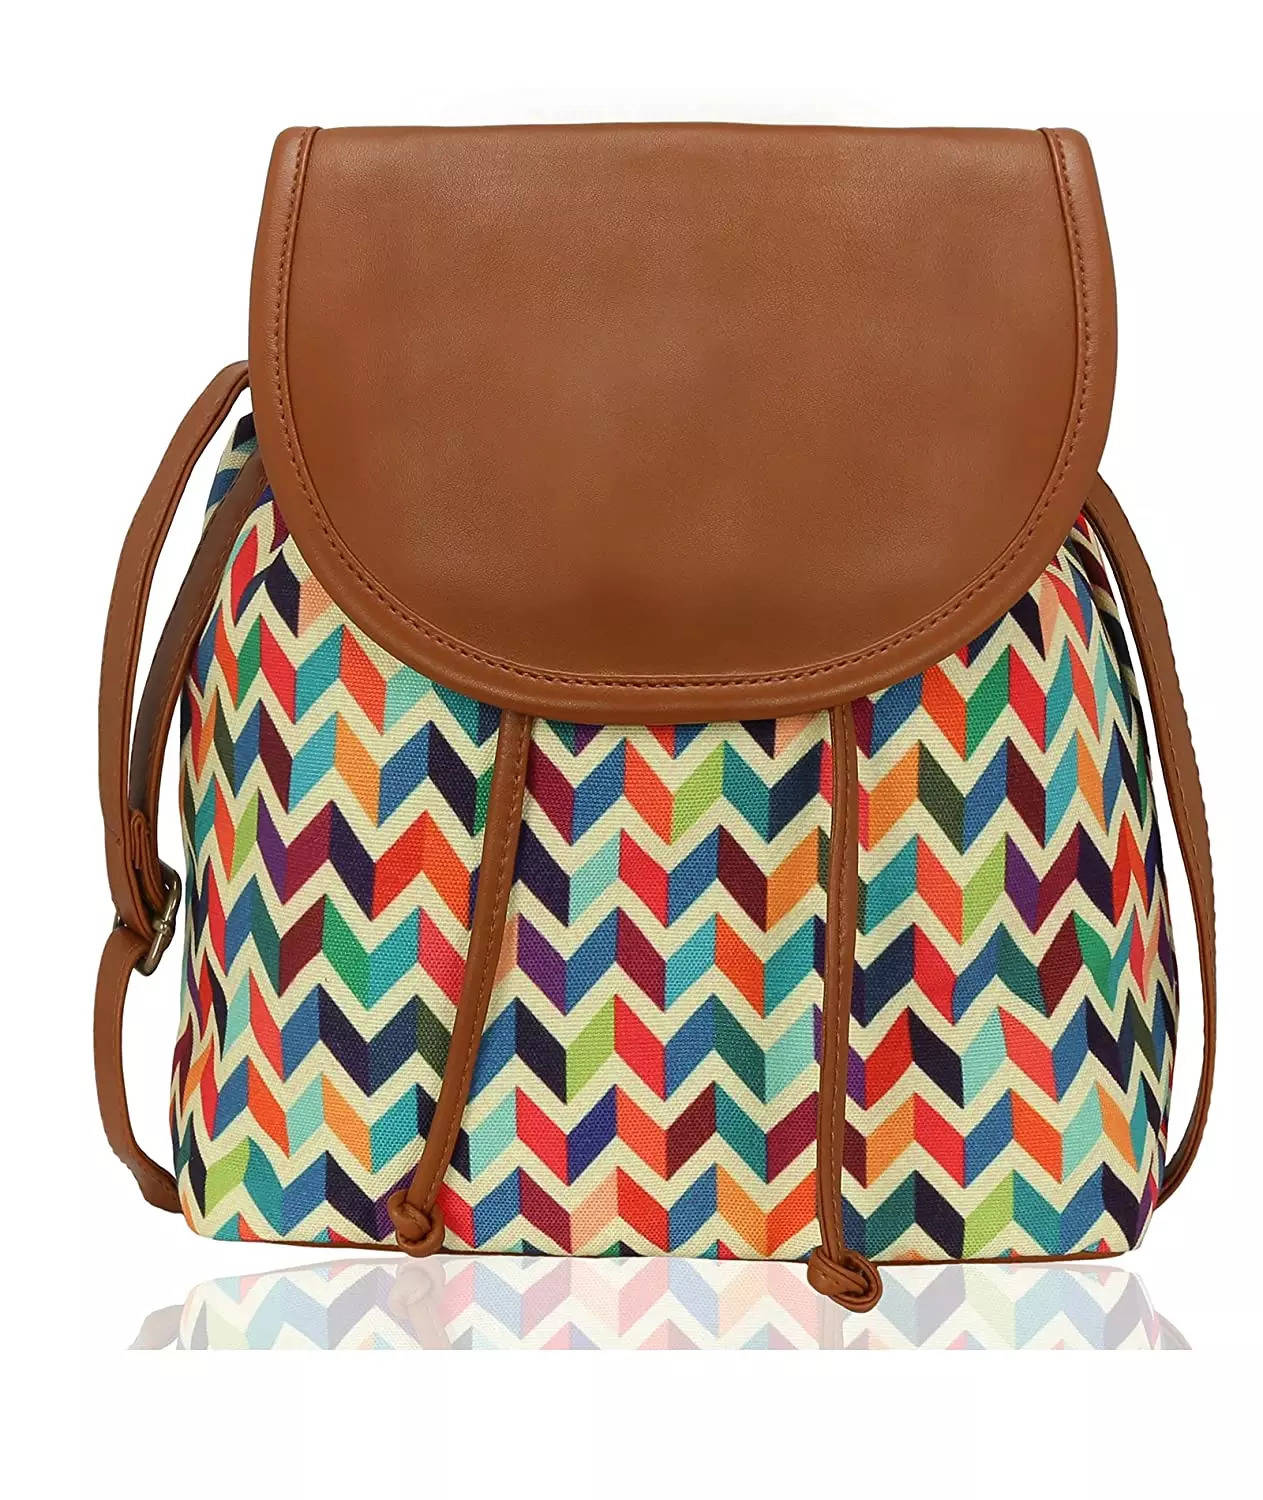 Our pick for the coolest side bags for college going fashionistas   Business Insider India